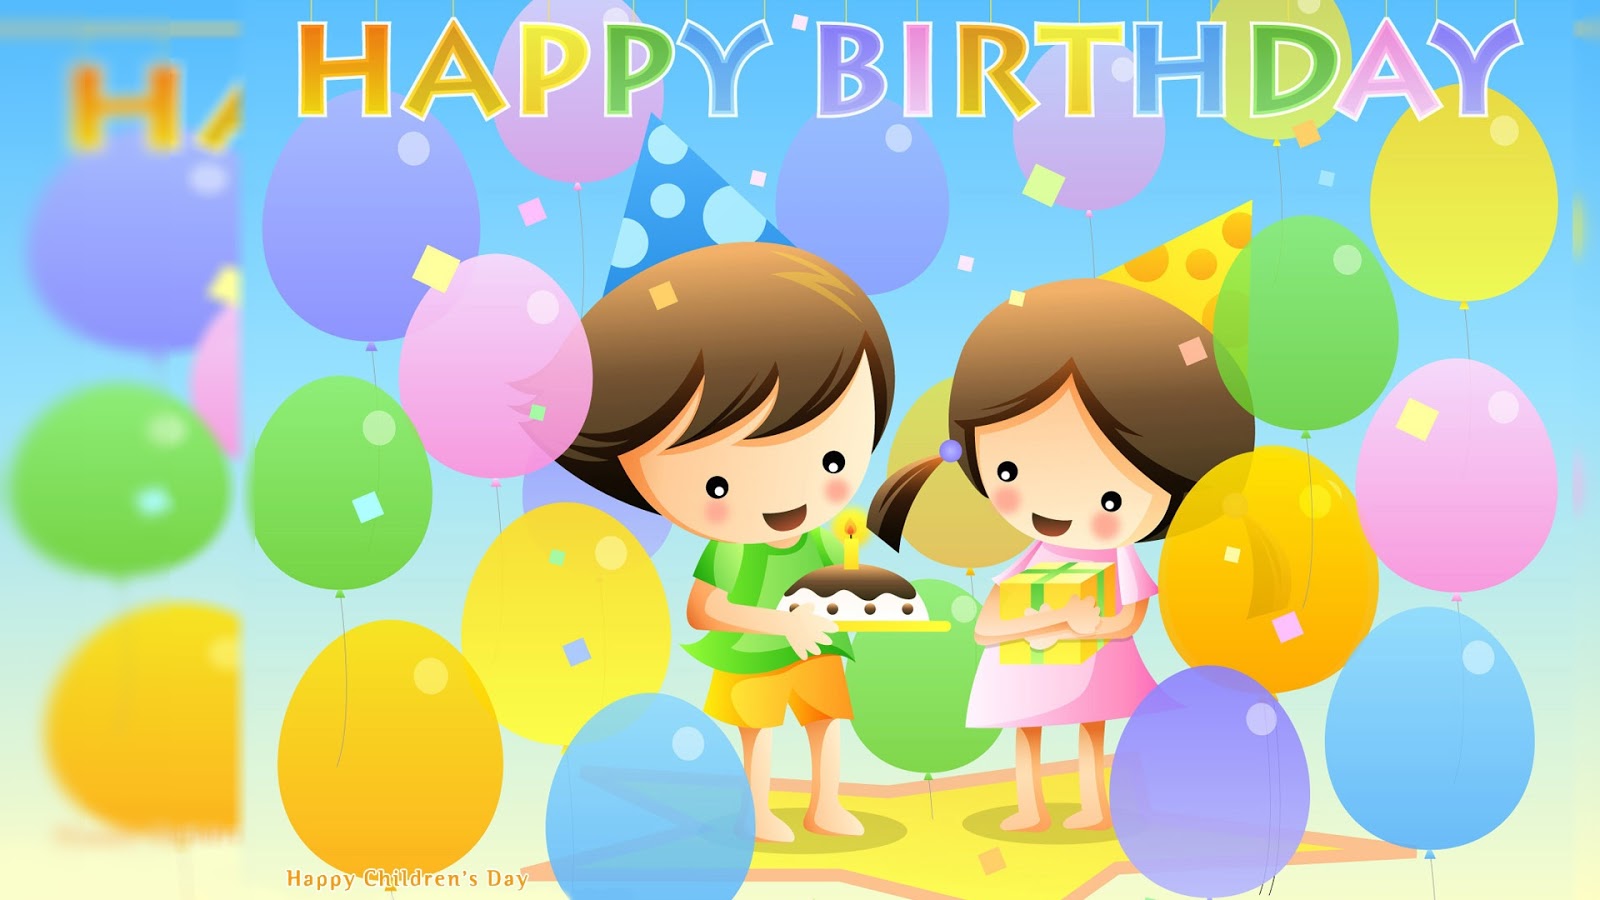 Happy Birthday Facebook Timeline Cover ~ Hindi Sms, Good Morning SMS, Good Night SMS ...